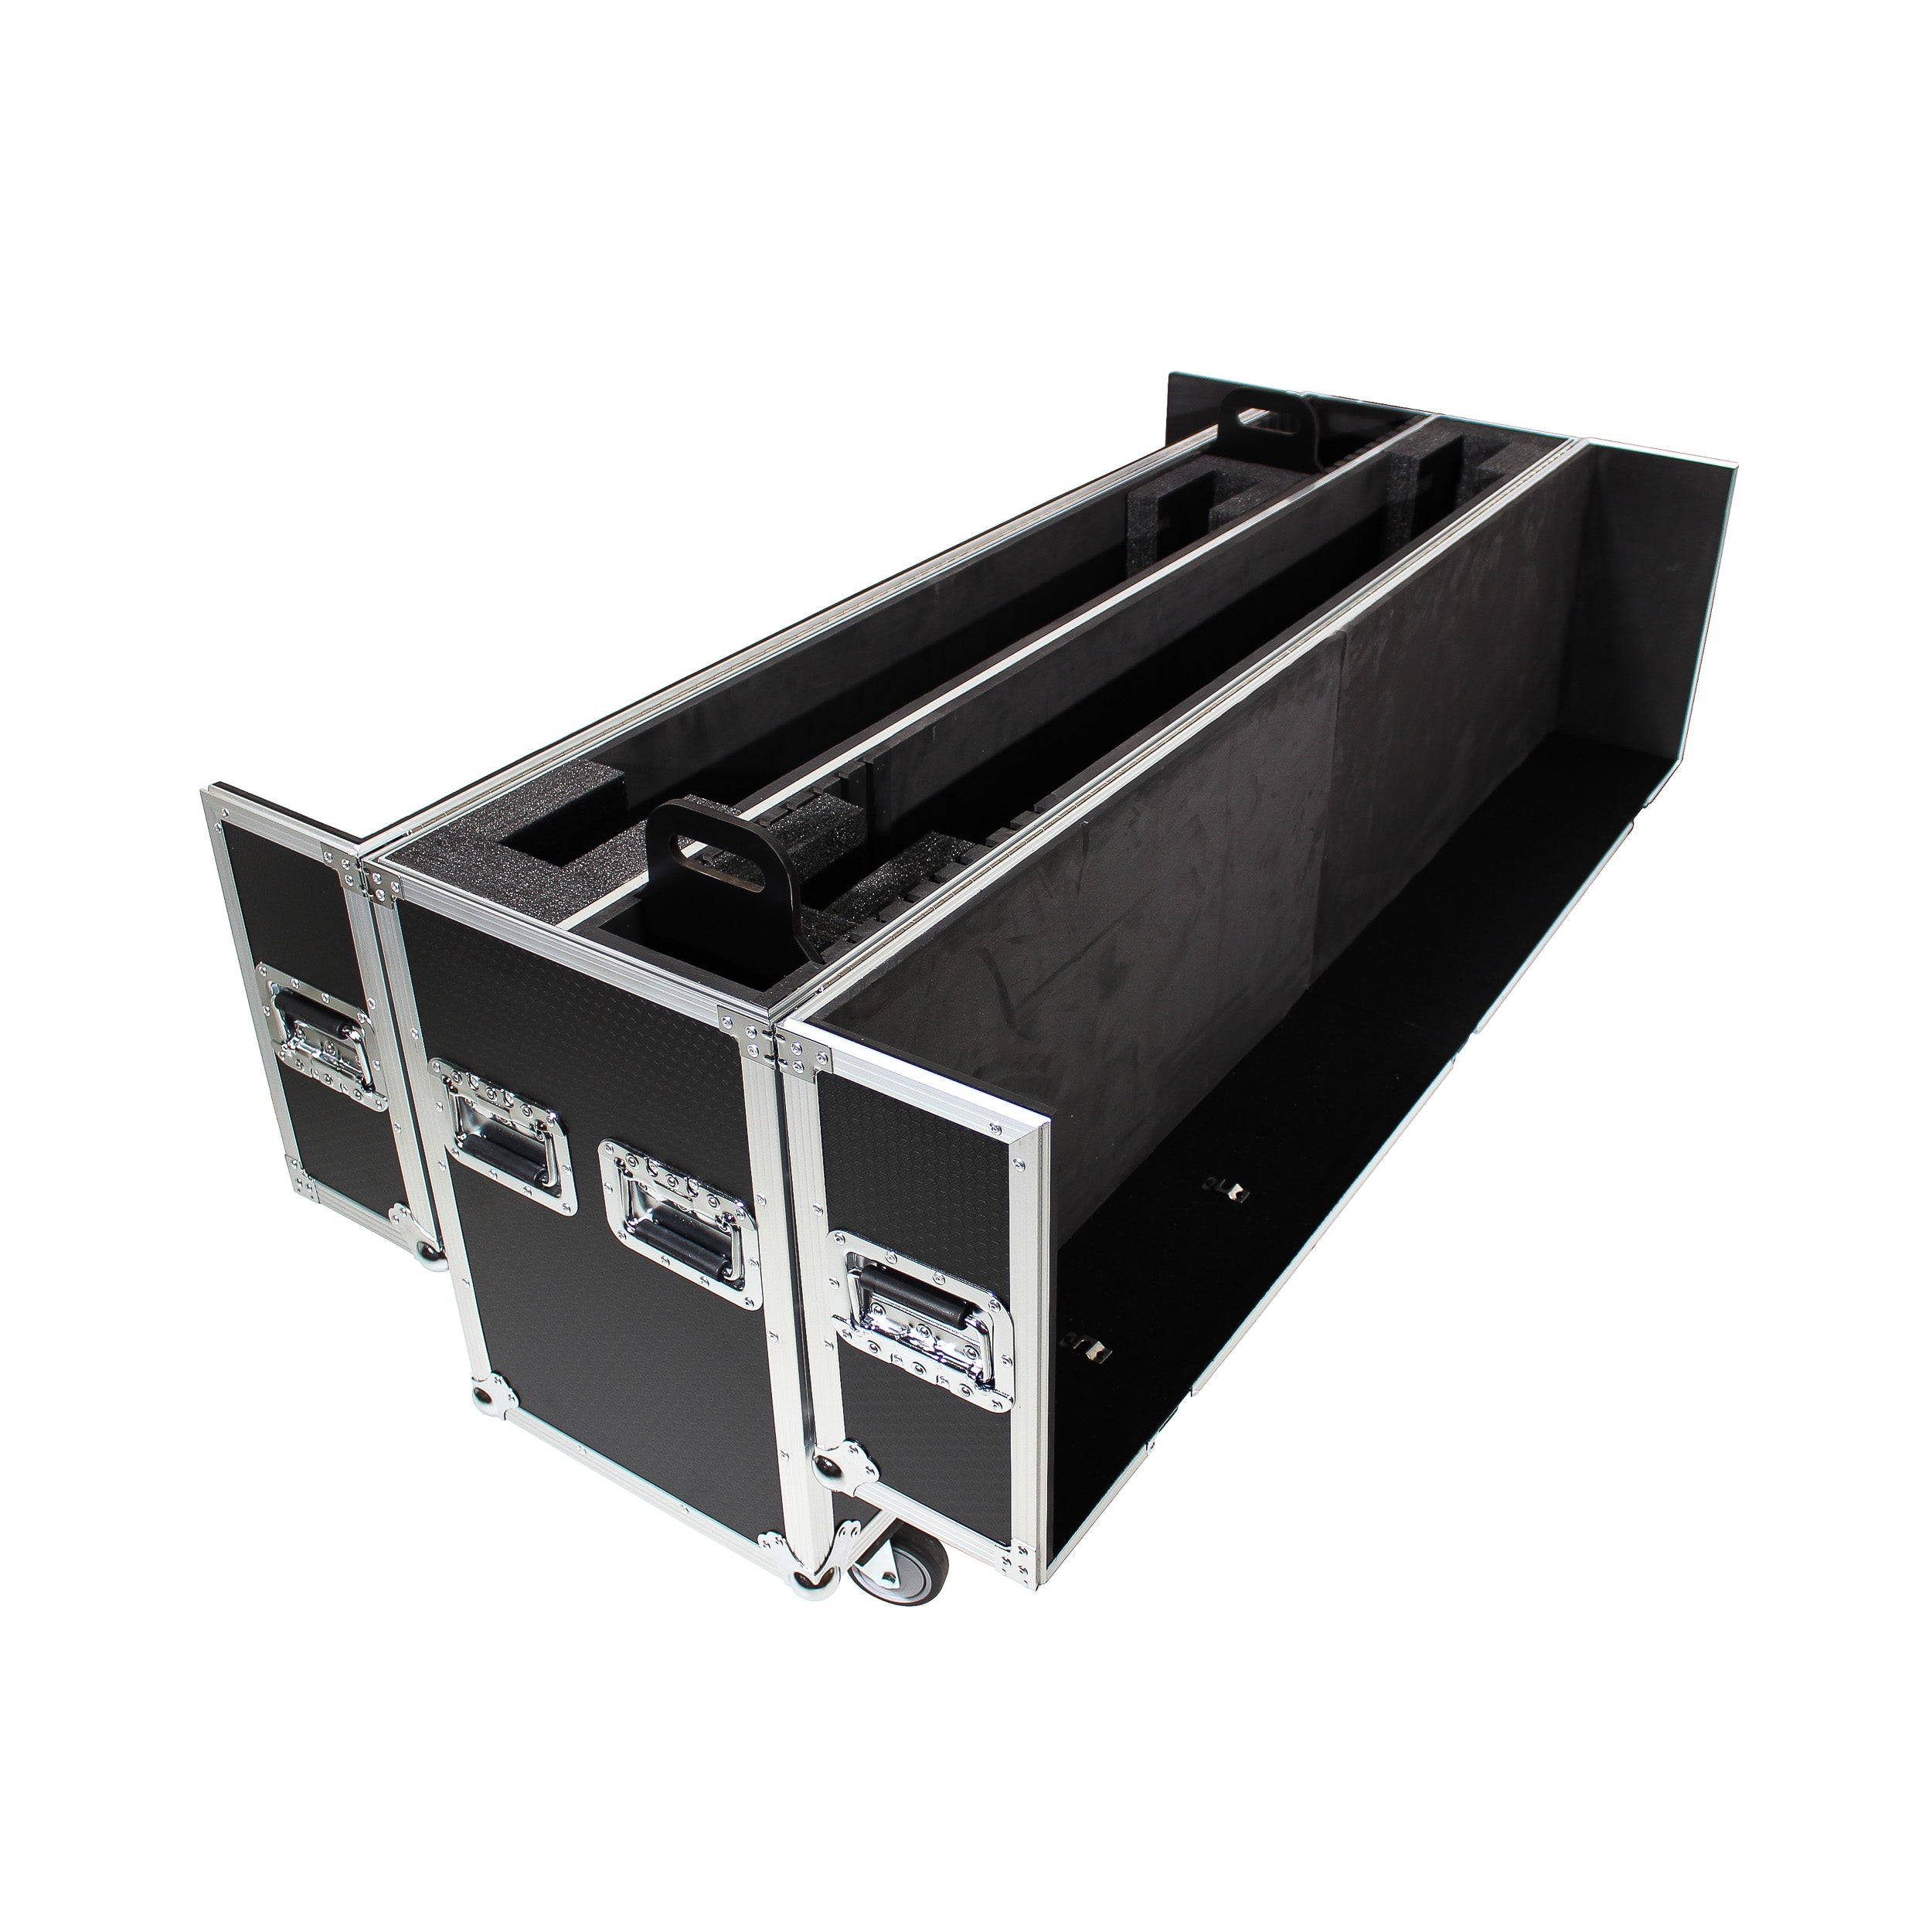 Pro X Universal Case For Flat Panel Monitor LED LCD TV Dual 80" to 90" Adjustable Flight Case W-4" Casters XS-LCD8090WX2